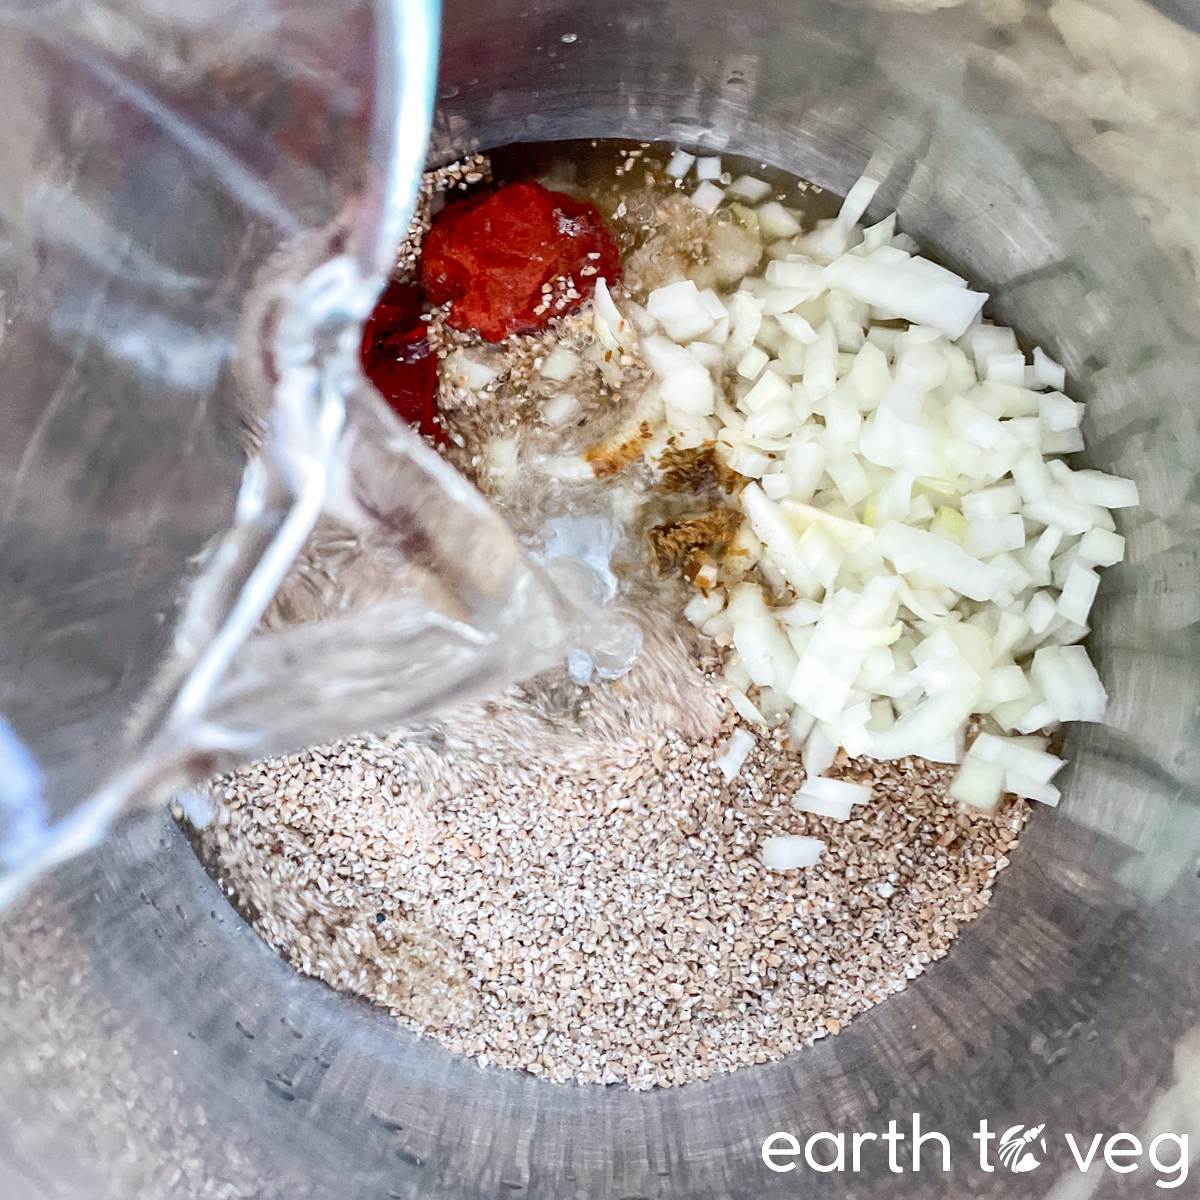 Water being poured into an Instant Pot filled with kisir base ingredients.